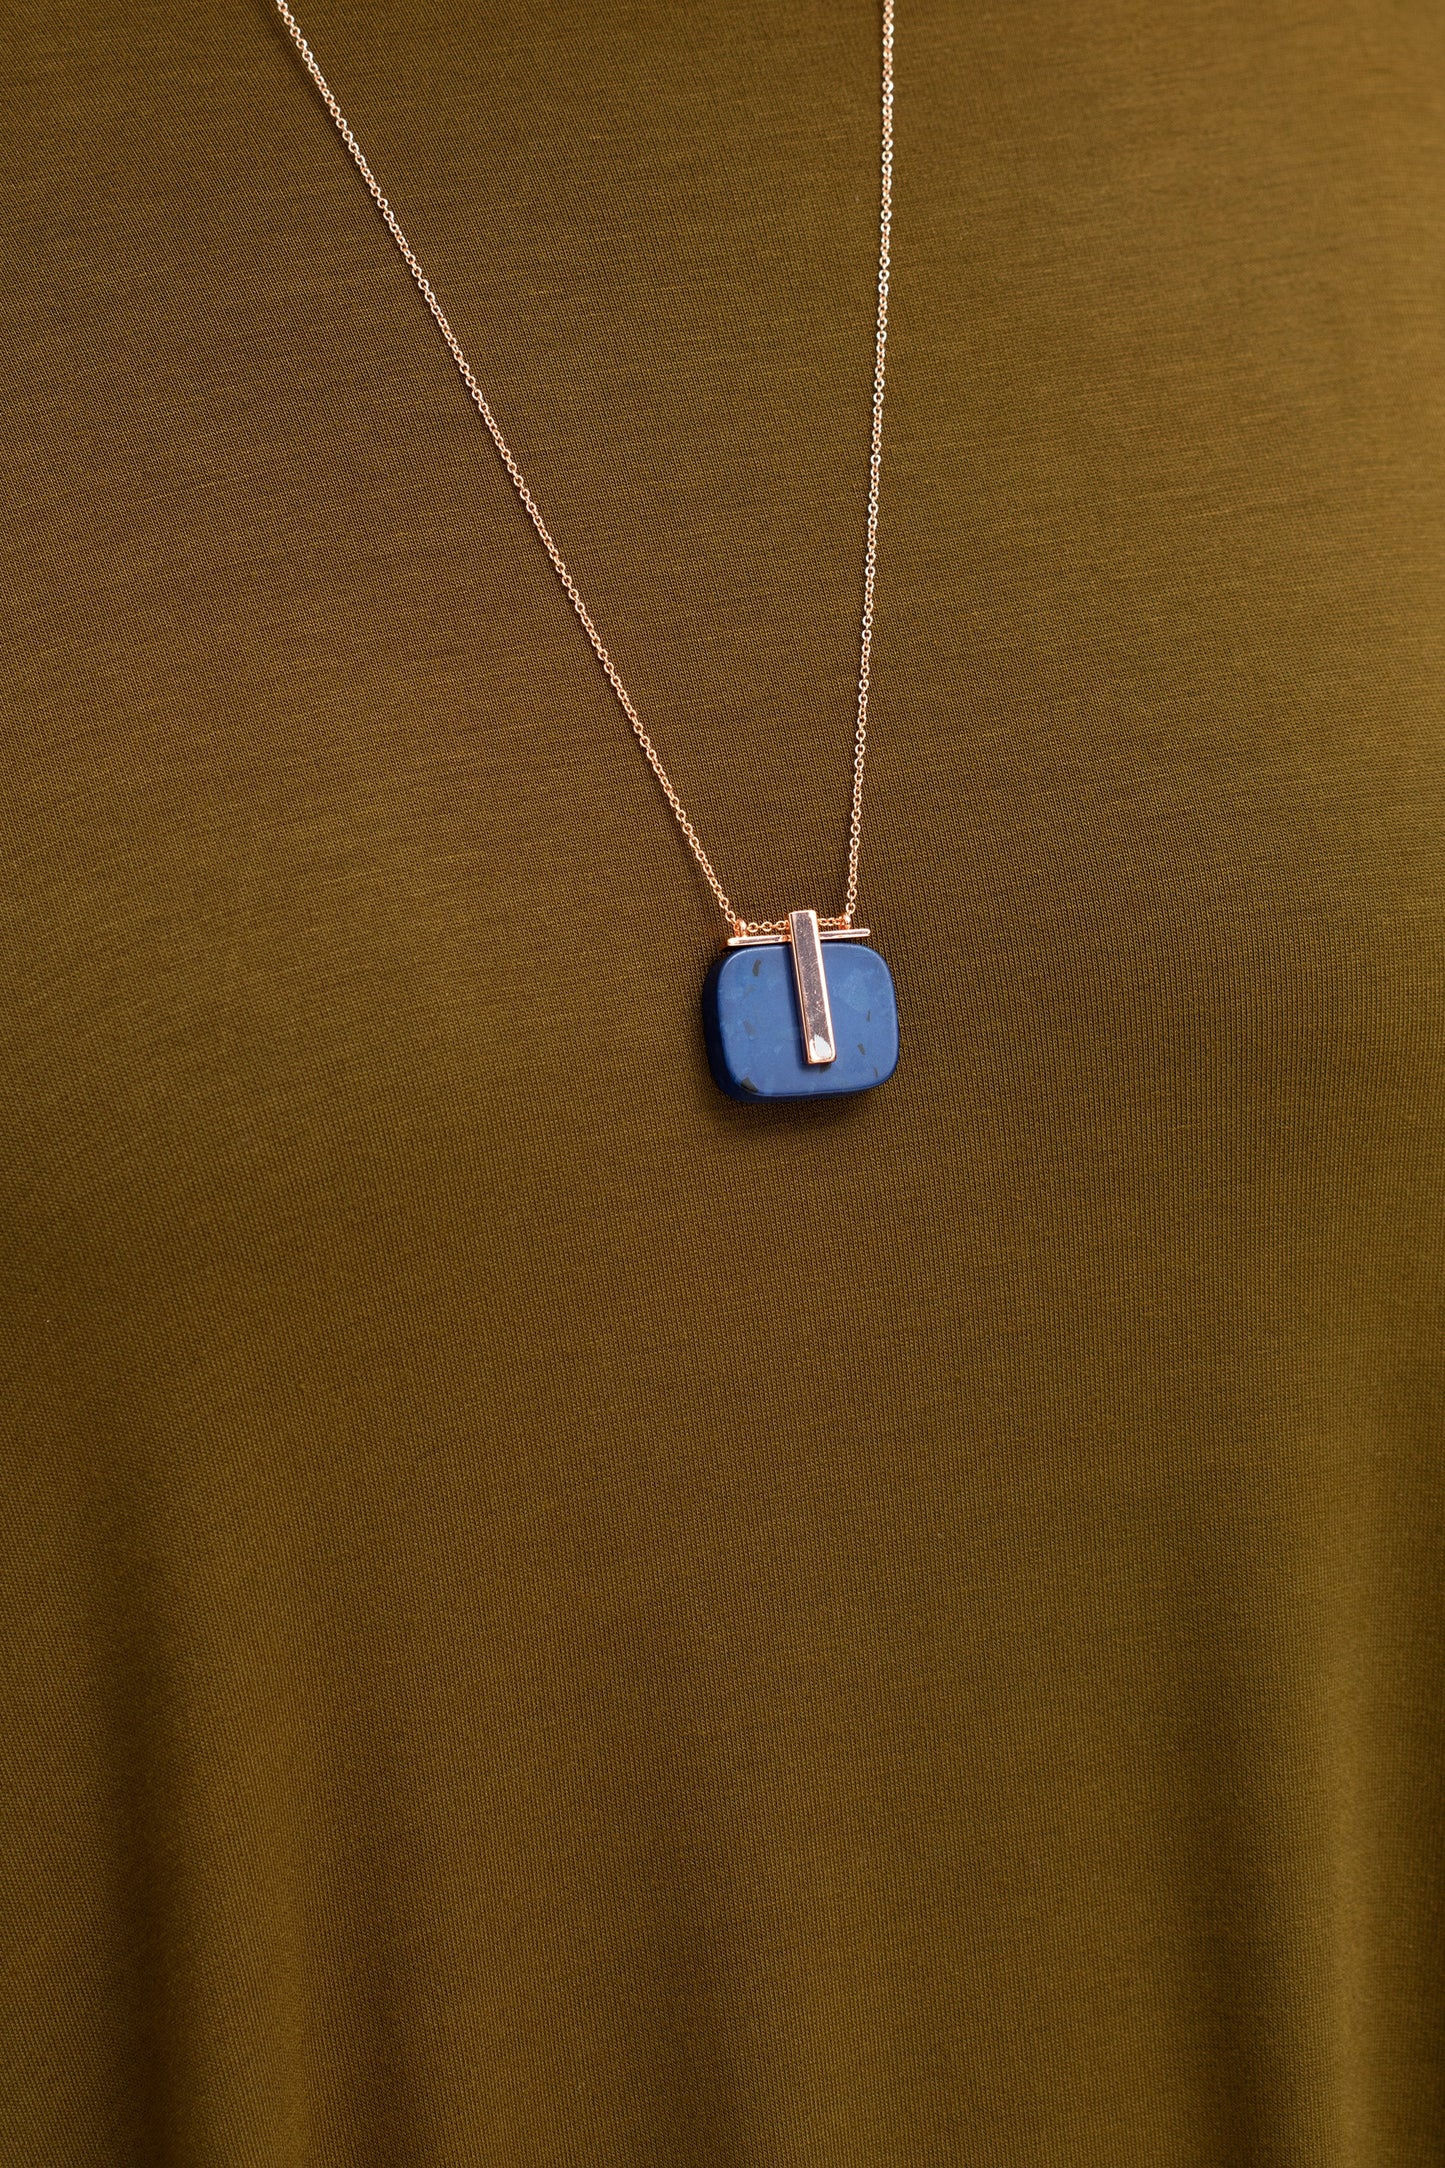 Klippe Stone and Metal Fine Chain Pendant Necklace Model detail DARK BLUE